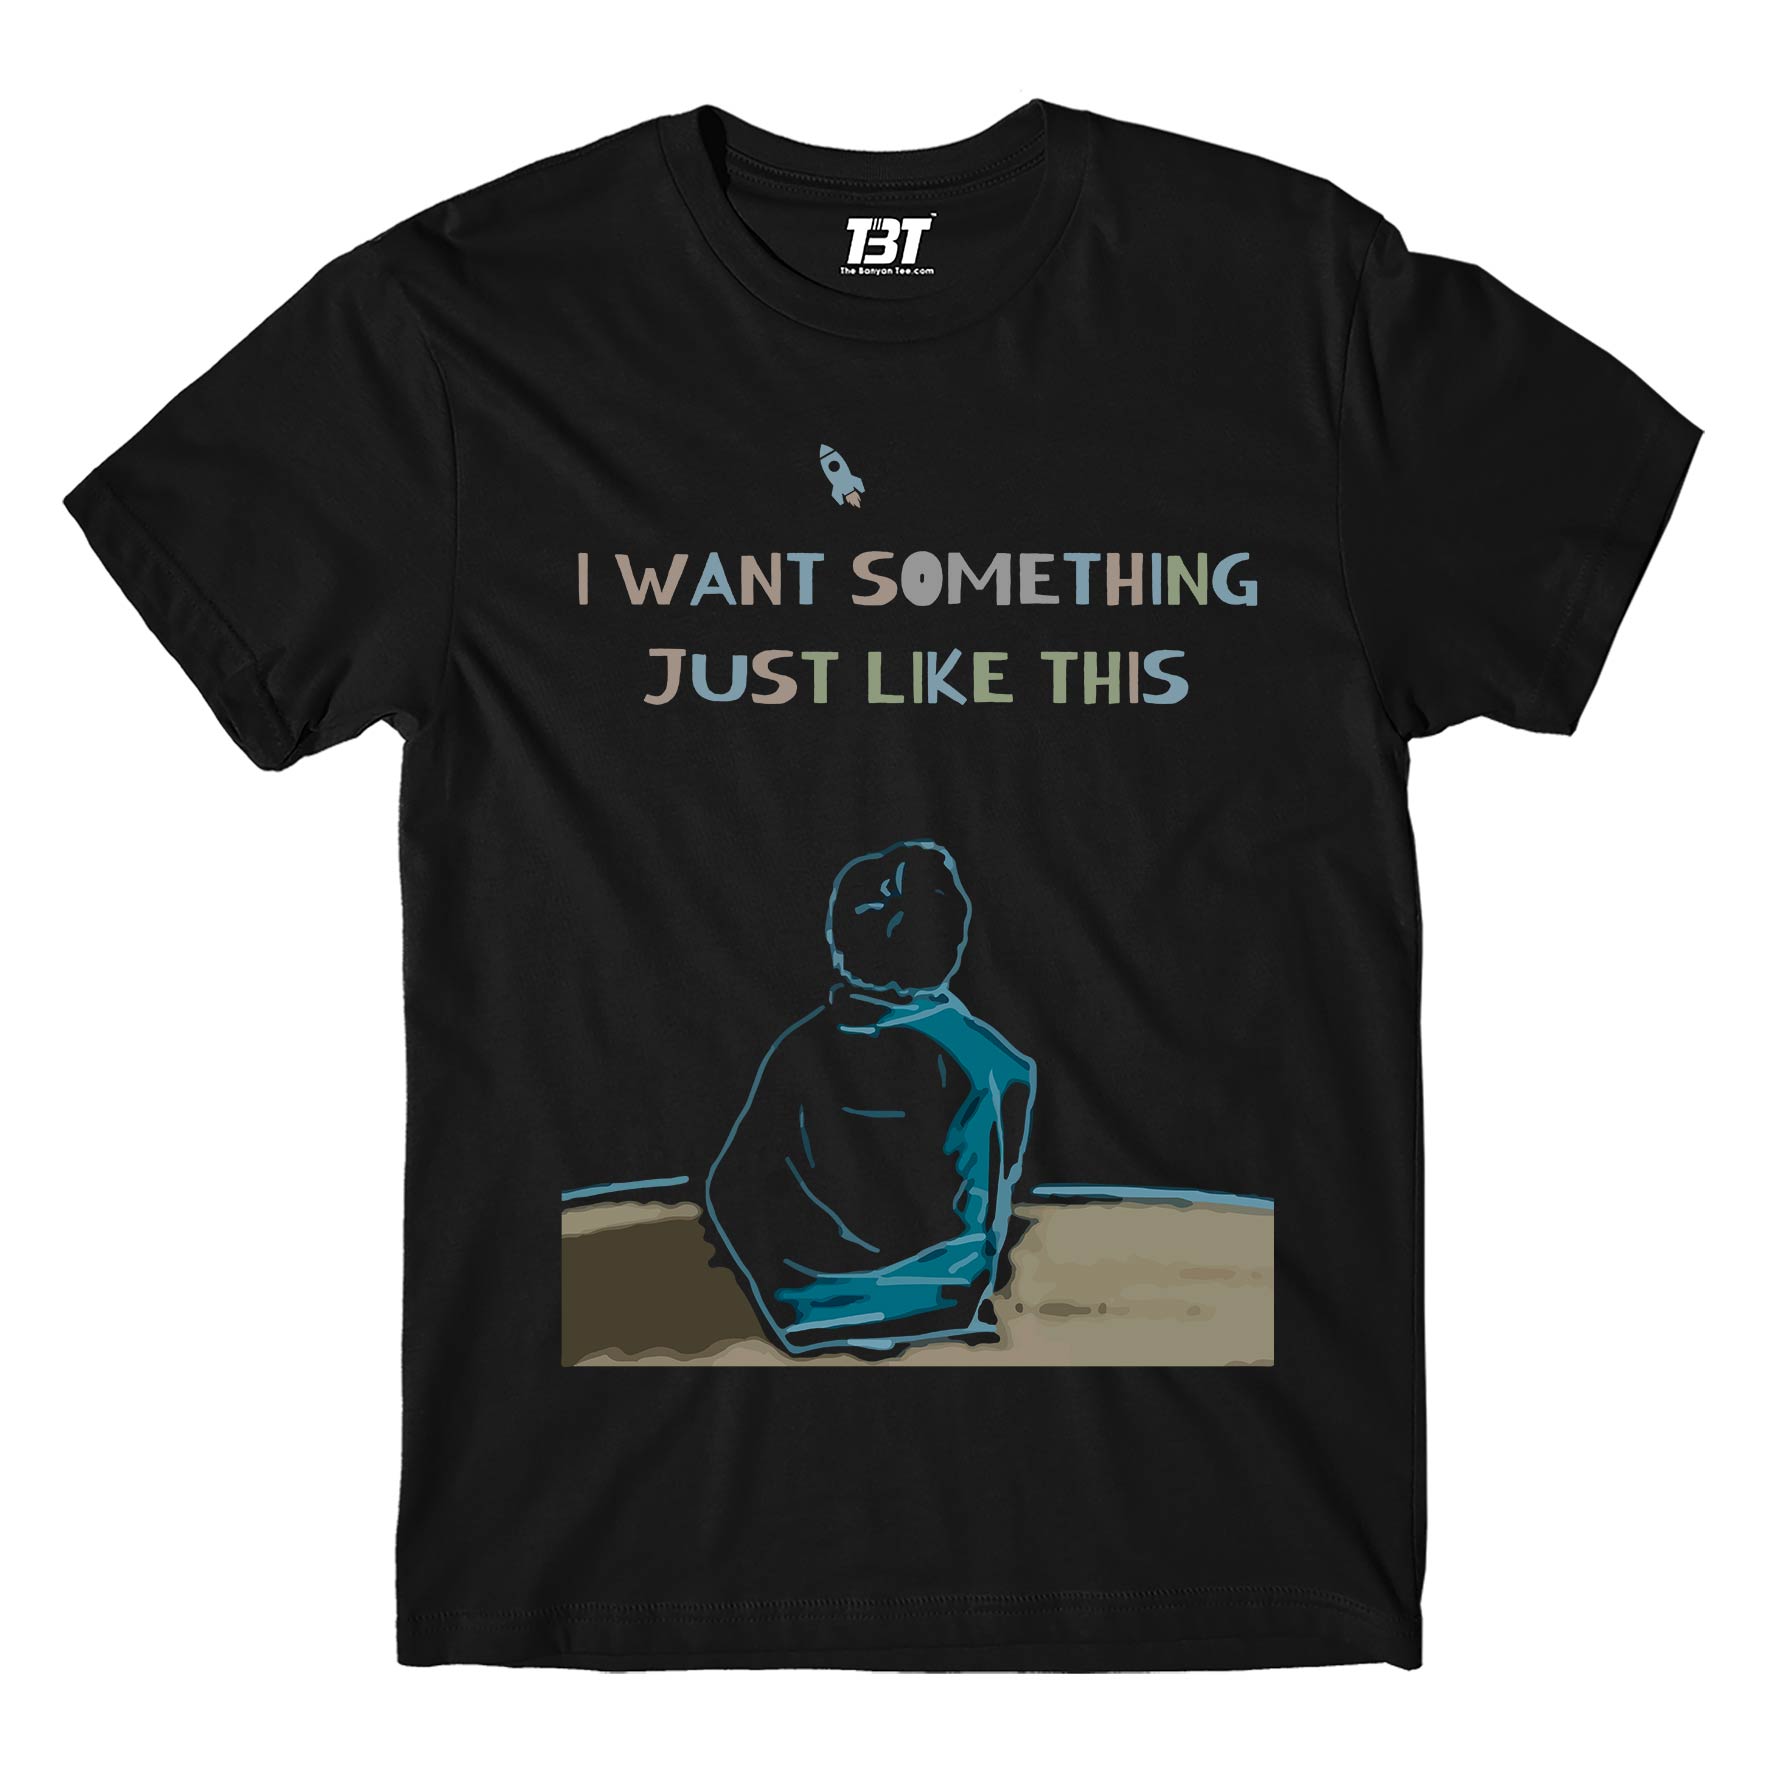 coldplay i want something just like this t-shirt music band buy online india the banyan tee tbt men women girls boys unisex black